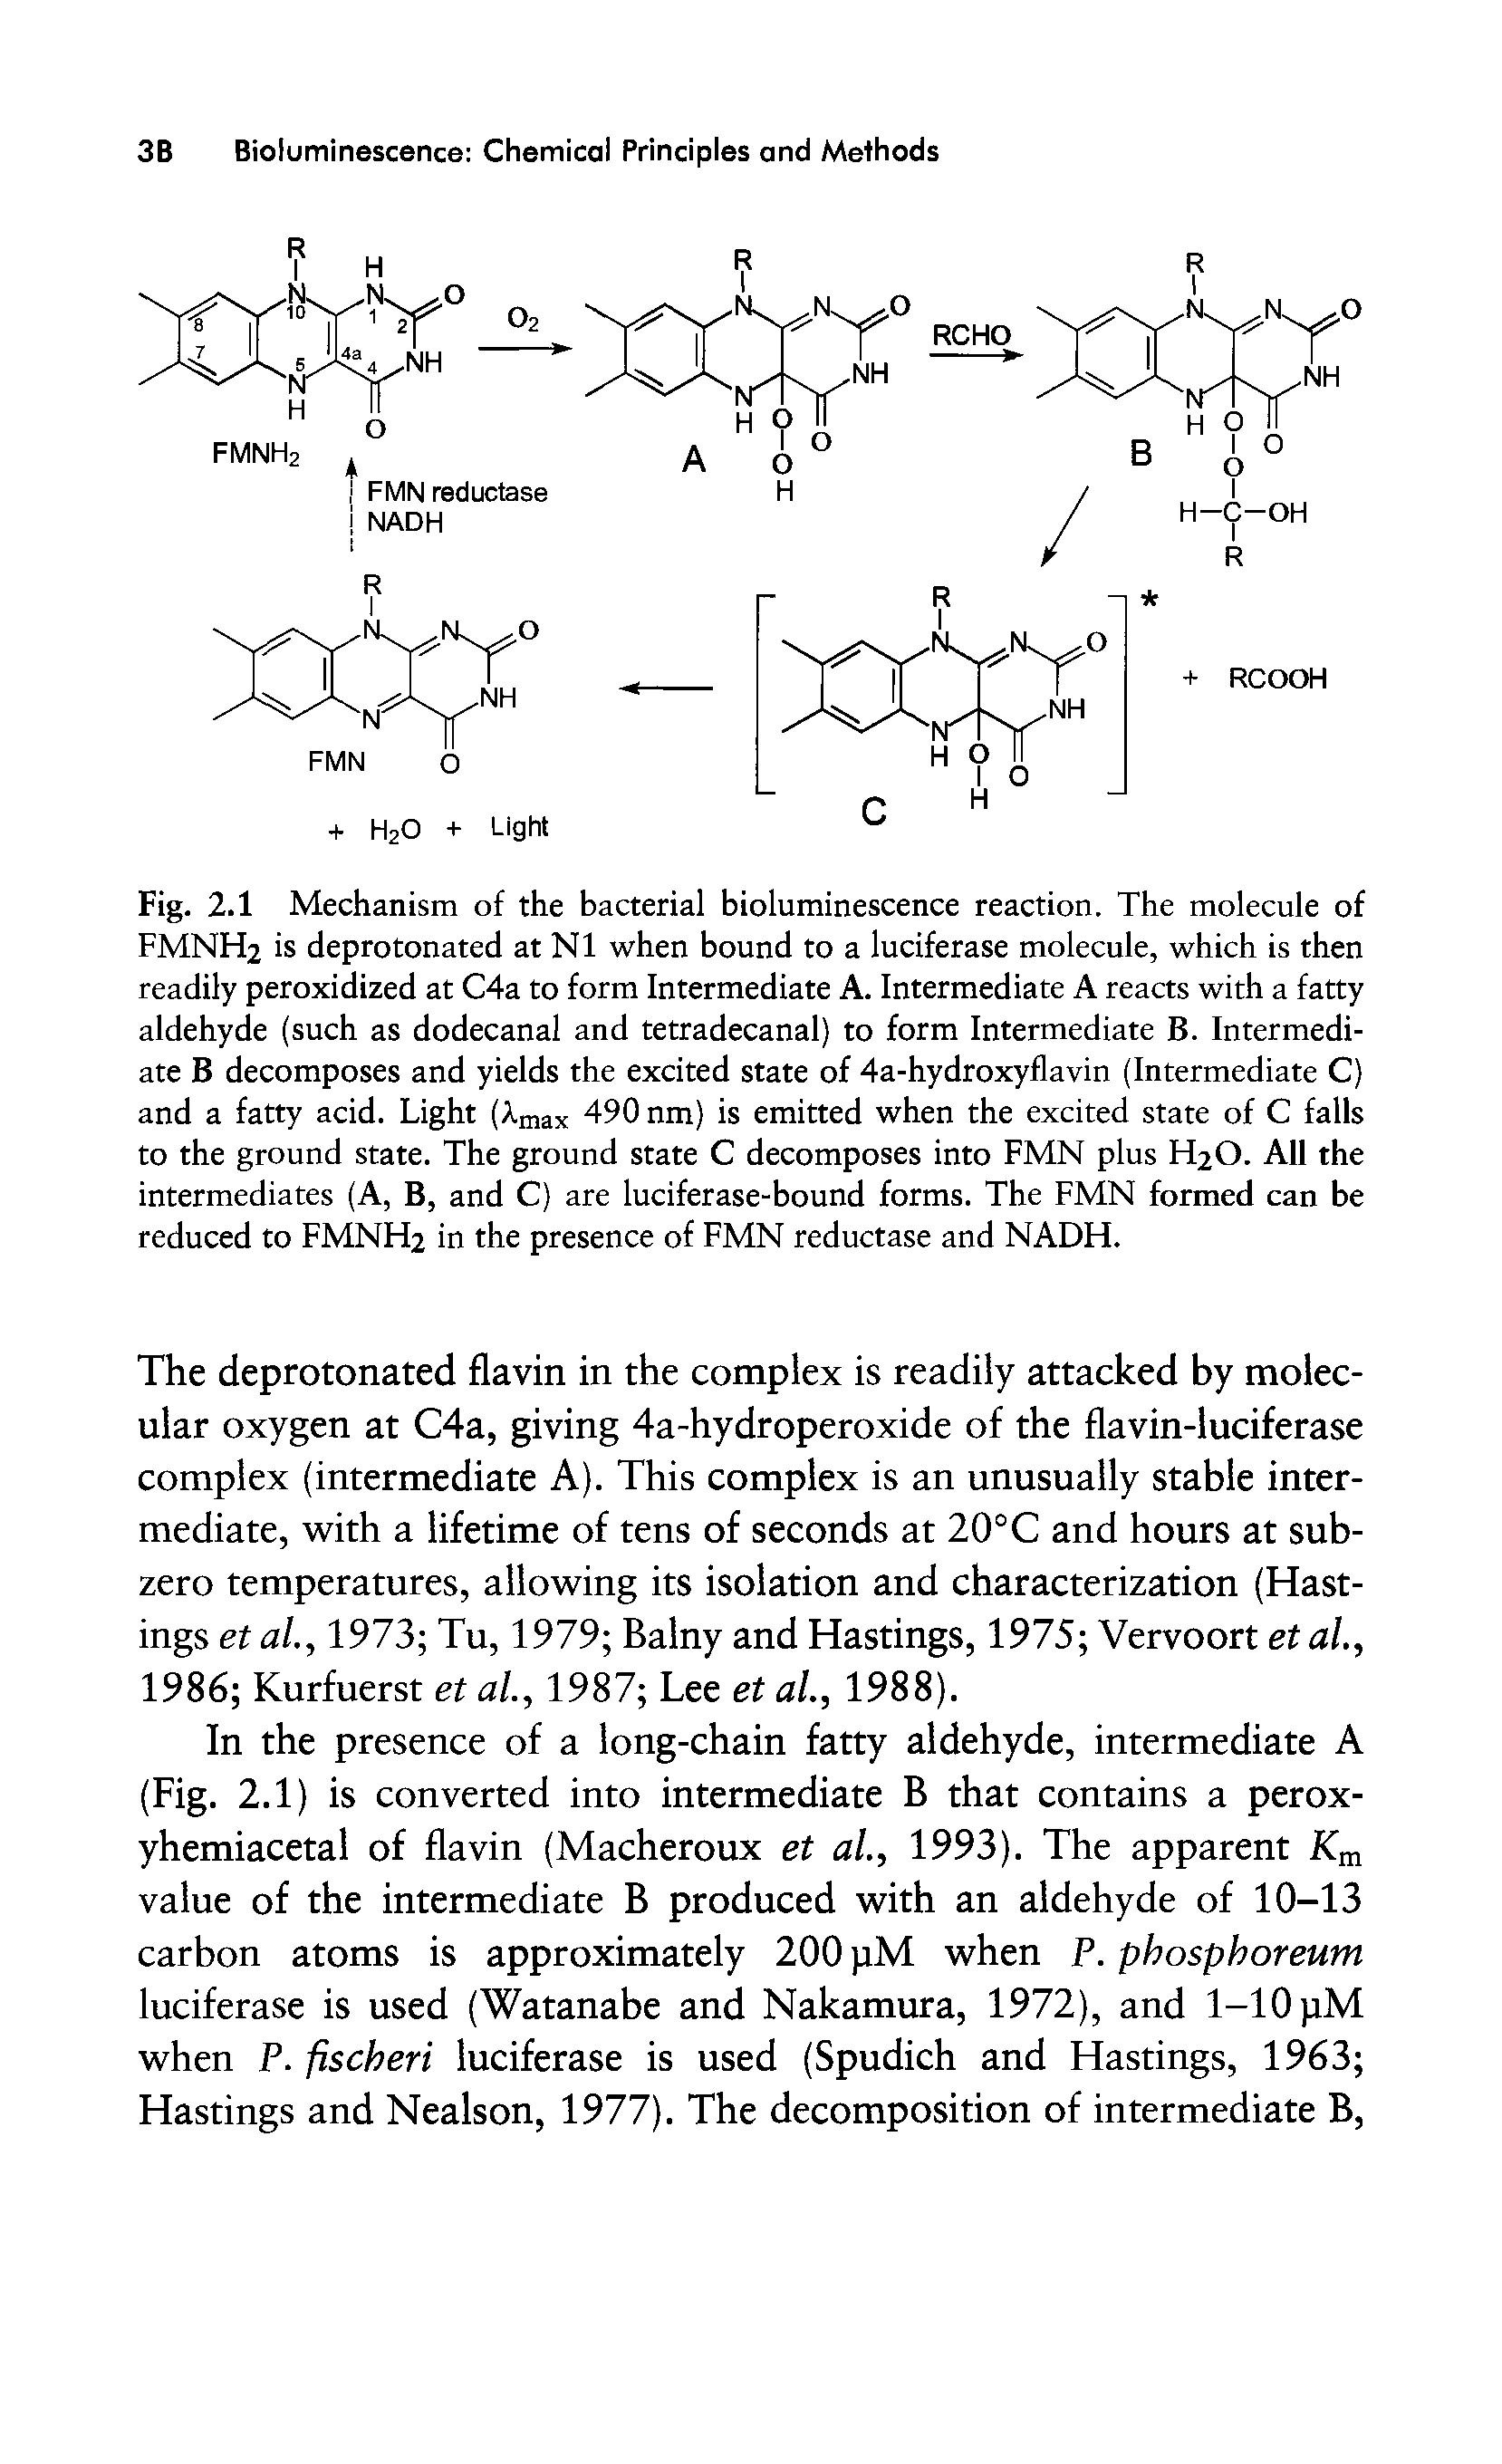 Fig. 2.1 Mechanism of the bacterial bioluminescence reaction. The molecule of FMNH2 is deprotonated at N1 when bound to a luciferase molecule, which is then readily peroxidized at C4a to form Intermediate A. Intermediate A reacts with a fatty aldehyde (such as dodecanal and tetradecanal) to form Intermediate B. Intermediate B decomposes and yields the excited state of 4a-hydroxyflavin (Intermediate C) and a fatty acid. Light (Amax 490 nm) is emitted when the excited state of C falls to the ground state. The ground state C decomposes into FMN plus H2O. All the intermediates (A, B, and C) are luciferase-bound forms. The FMN formed can be reduced to FMNH2 in the presence of FMN reductase and NADH.